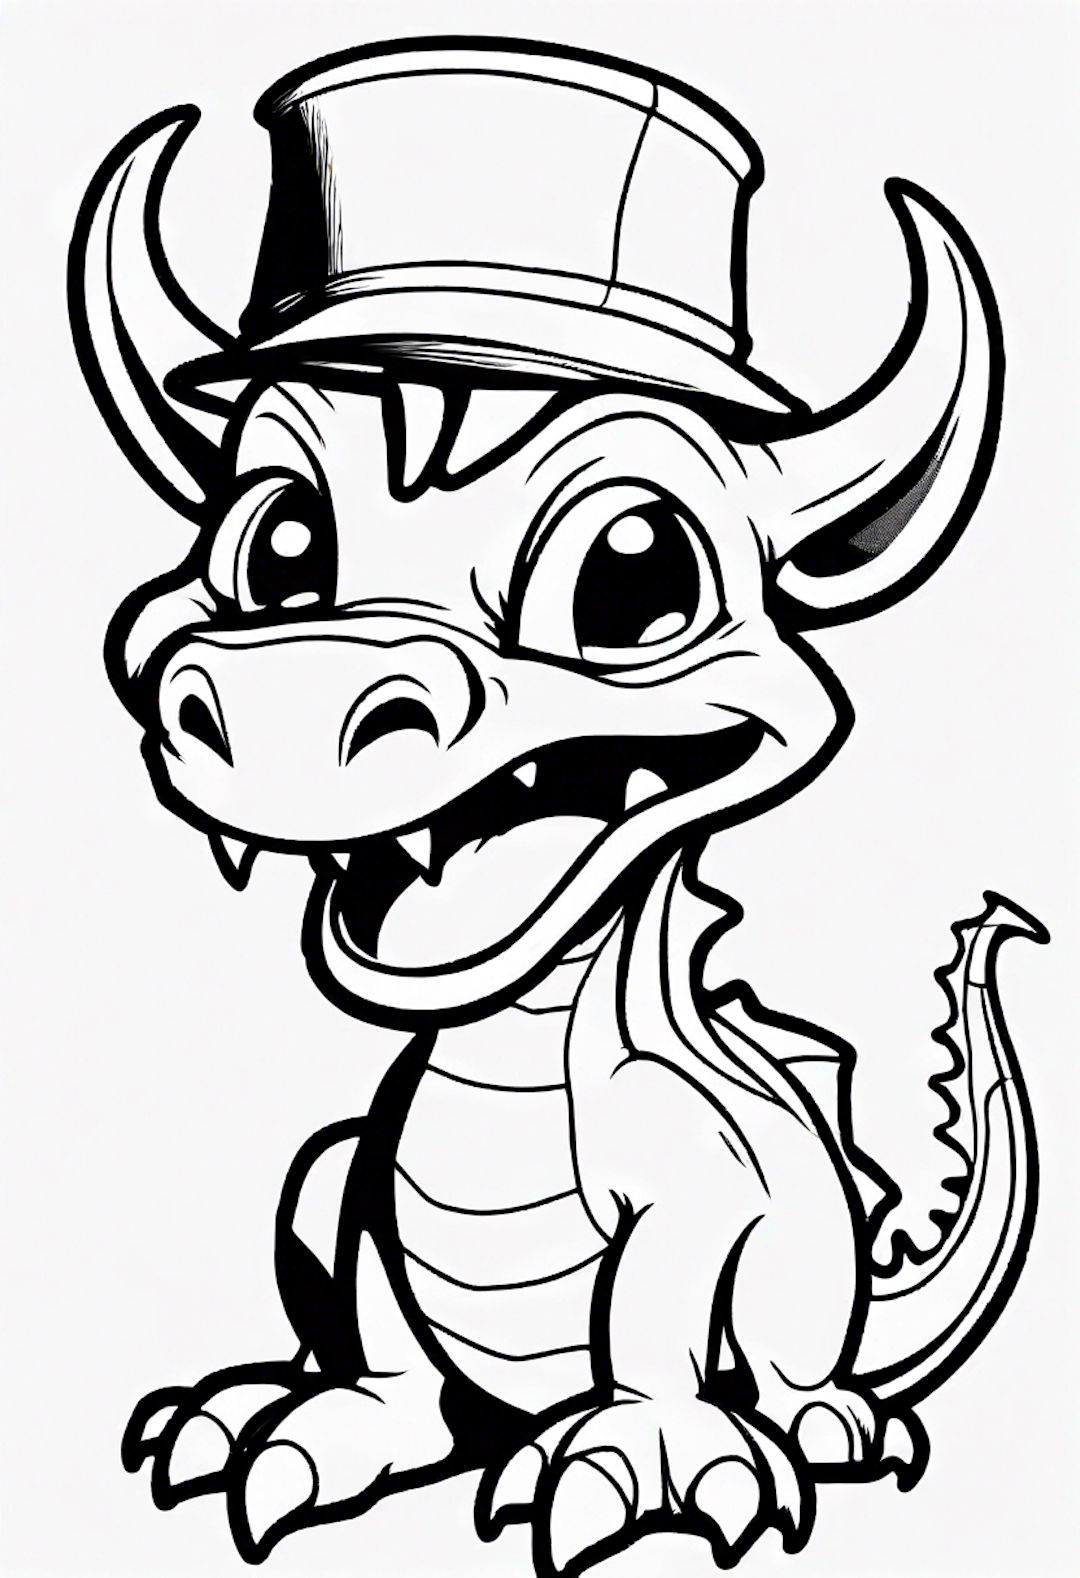 Cartoon Dragon With A Funny Hat